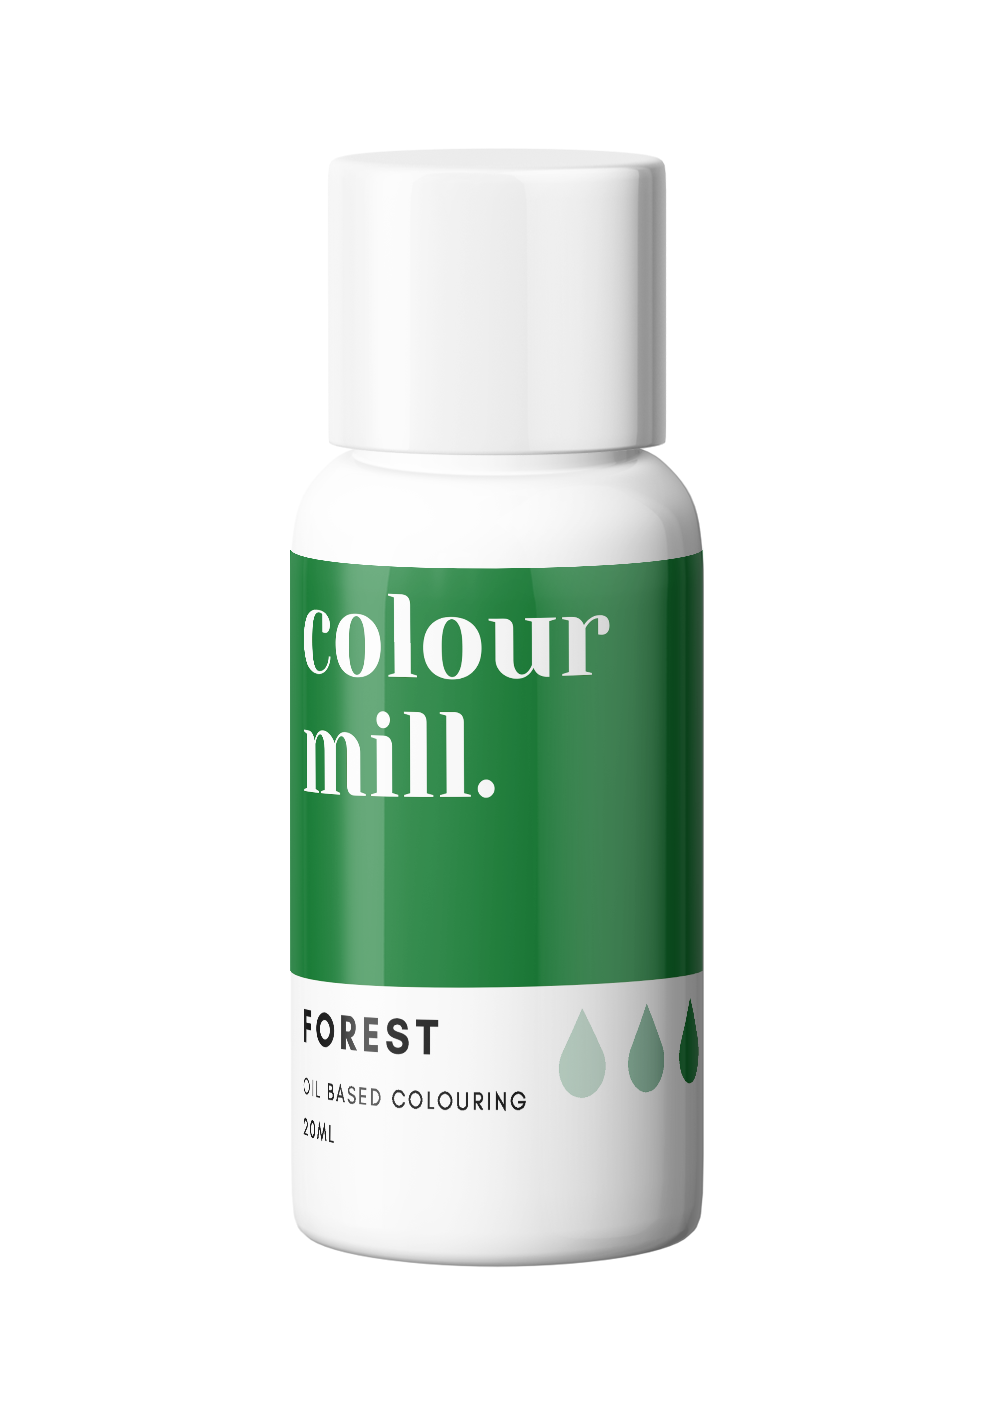 FOREST- 20ml Colour Mill